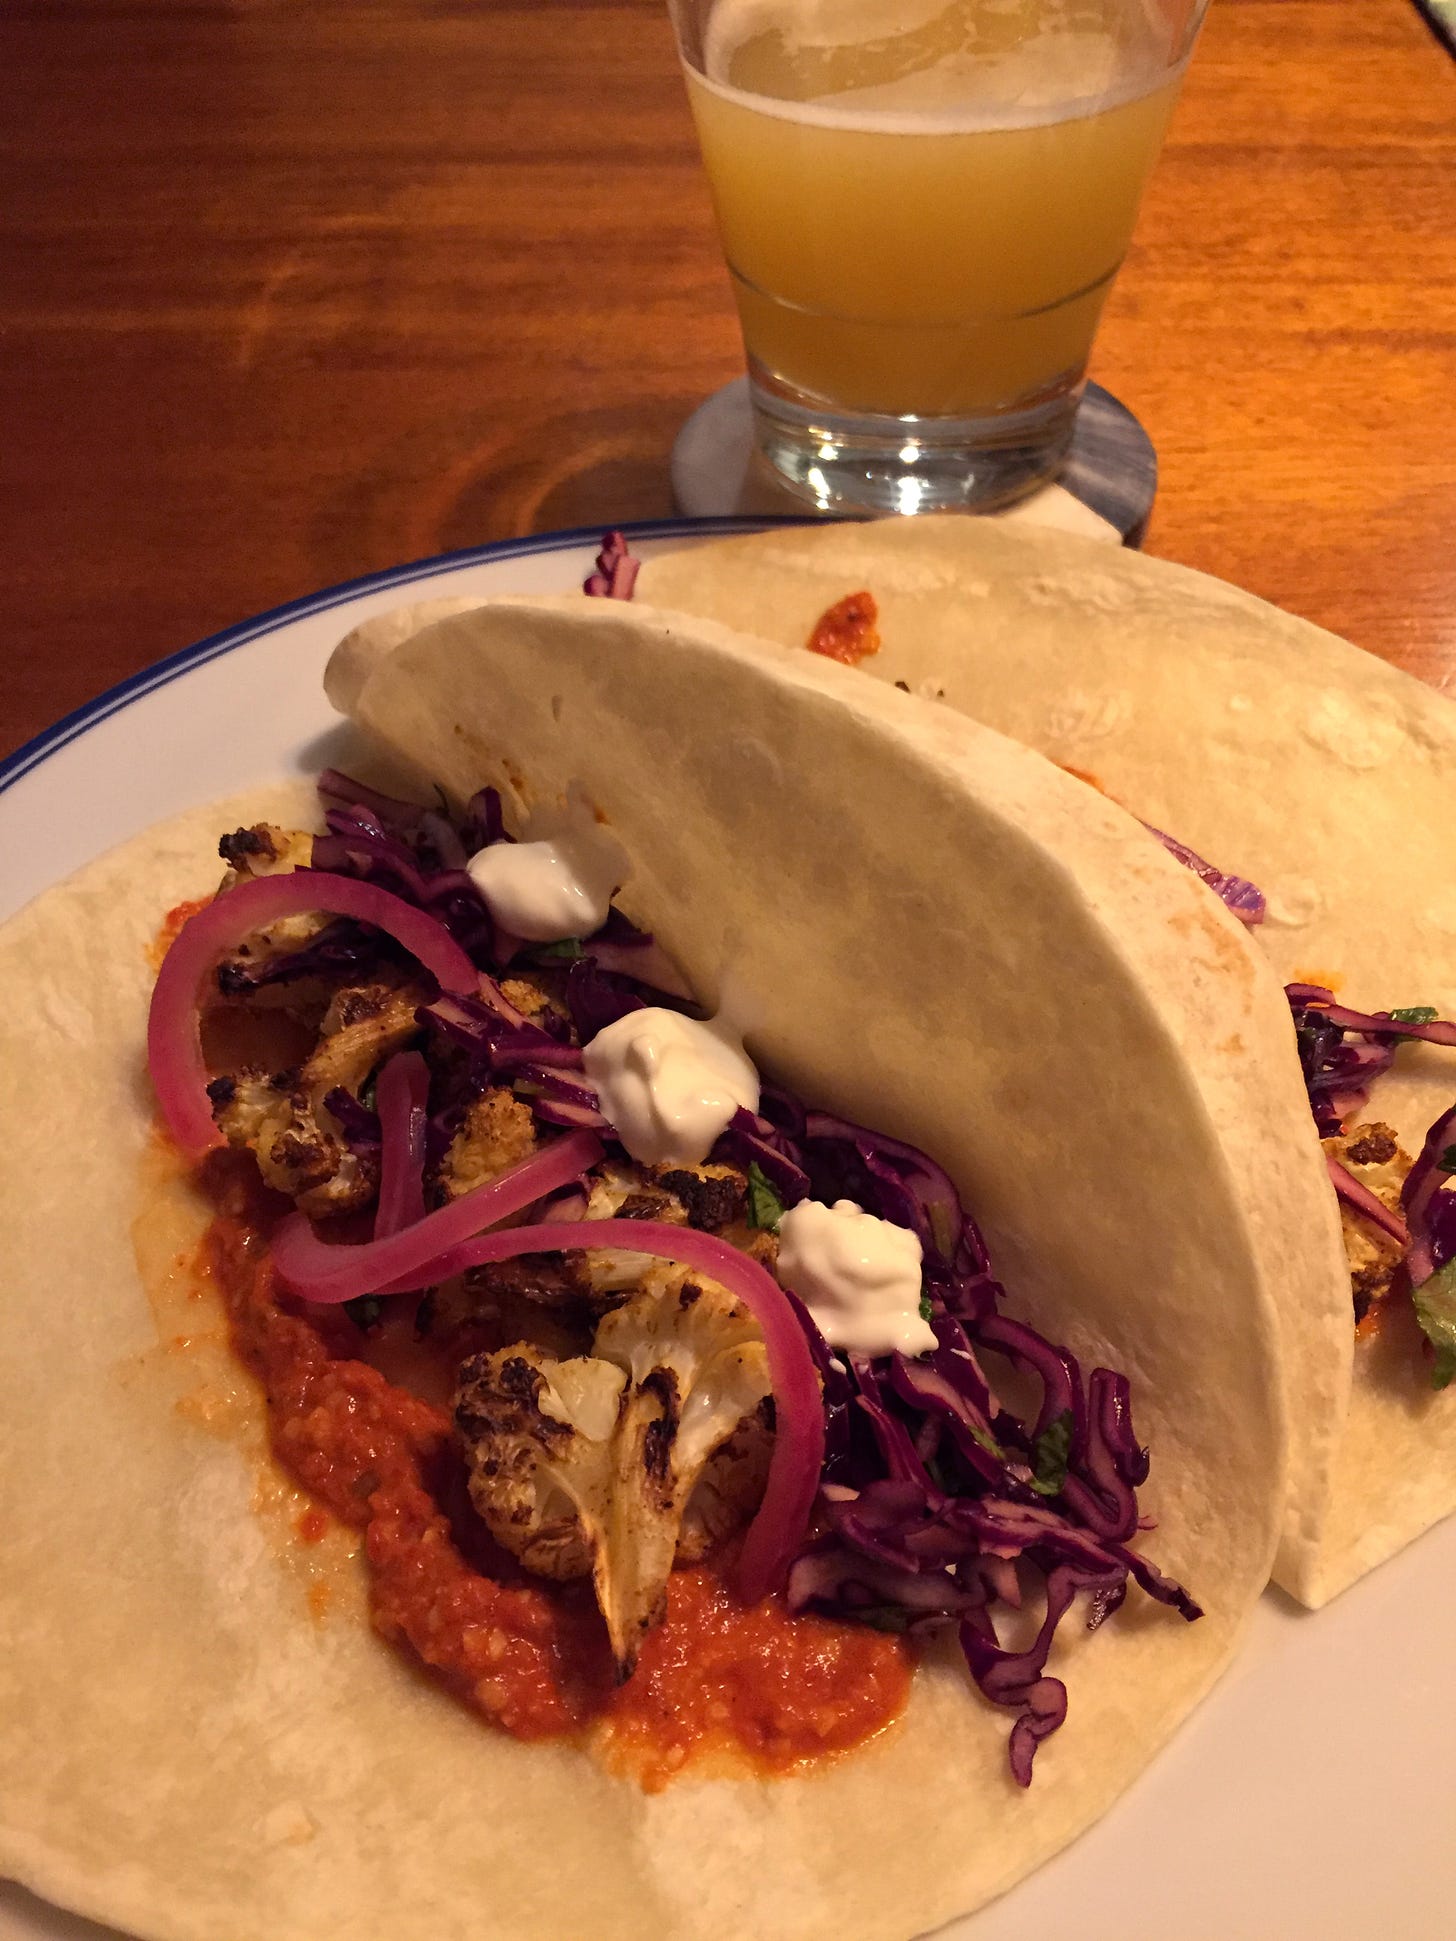 Two 8" flour tortillas filled with romesco, charred cauliflower, and red cabbage slaw. Dots of sour cream and pink slices of pickled onion sit on top, and a glass of hazy IPA rests on a coaster just to the upper right of the plate.